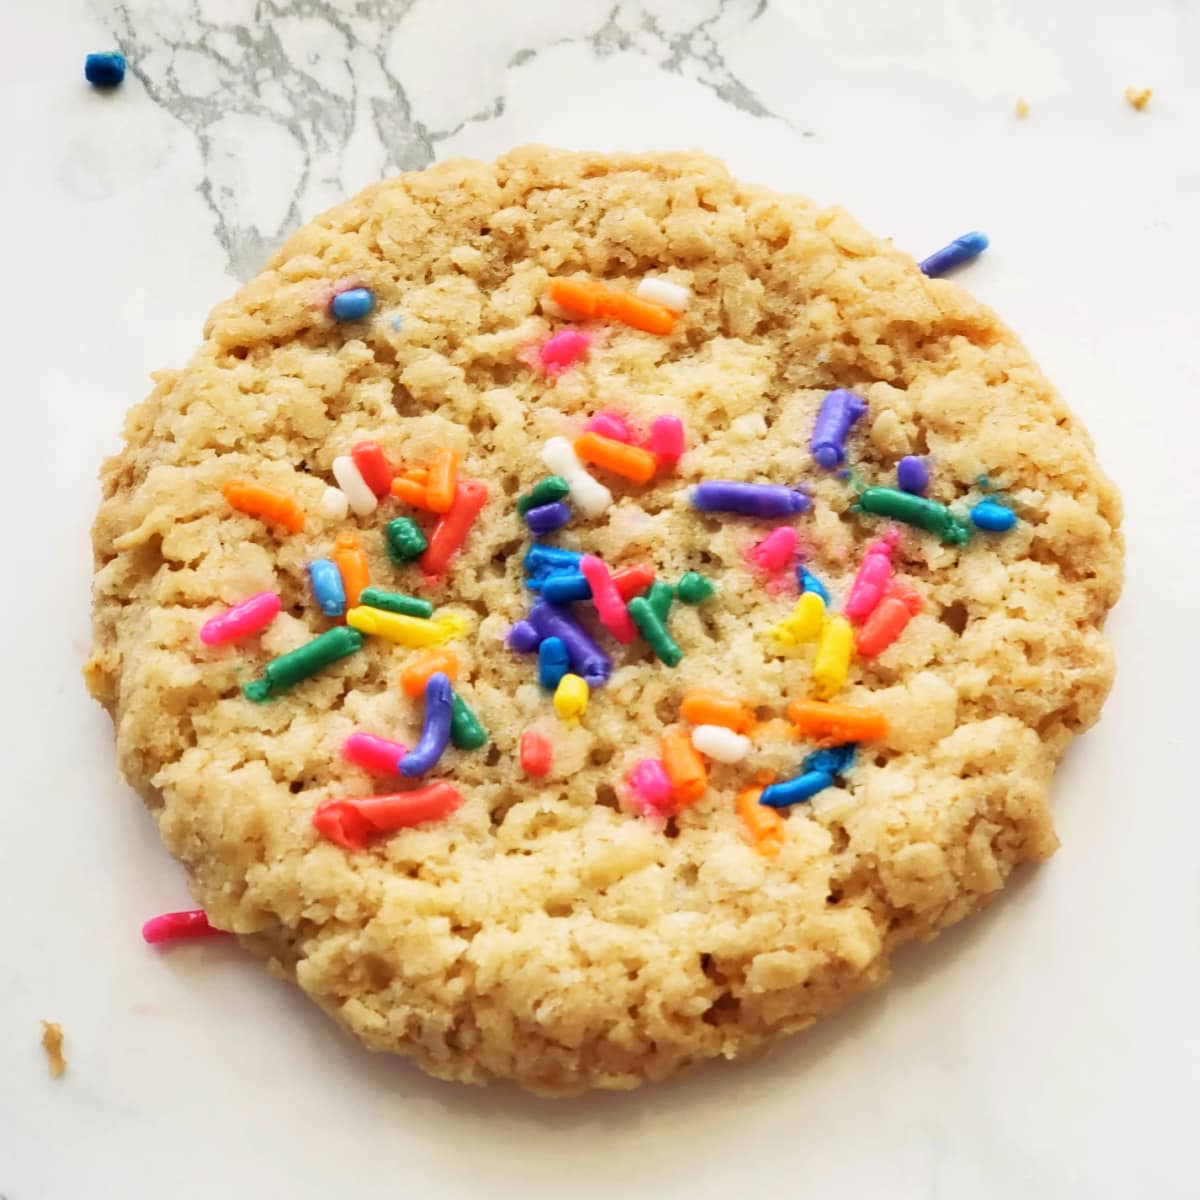 A single Oatmeal Shortbread Cookie with colorful sprinkles on top on a white marble countertop